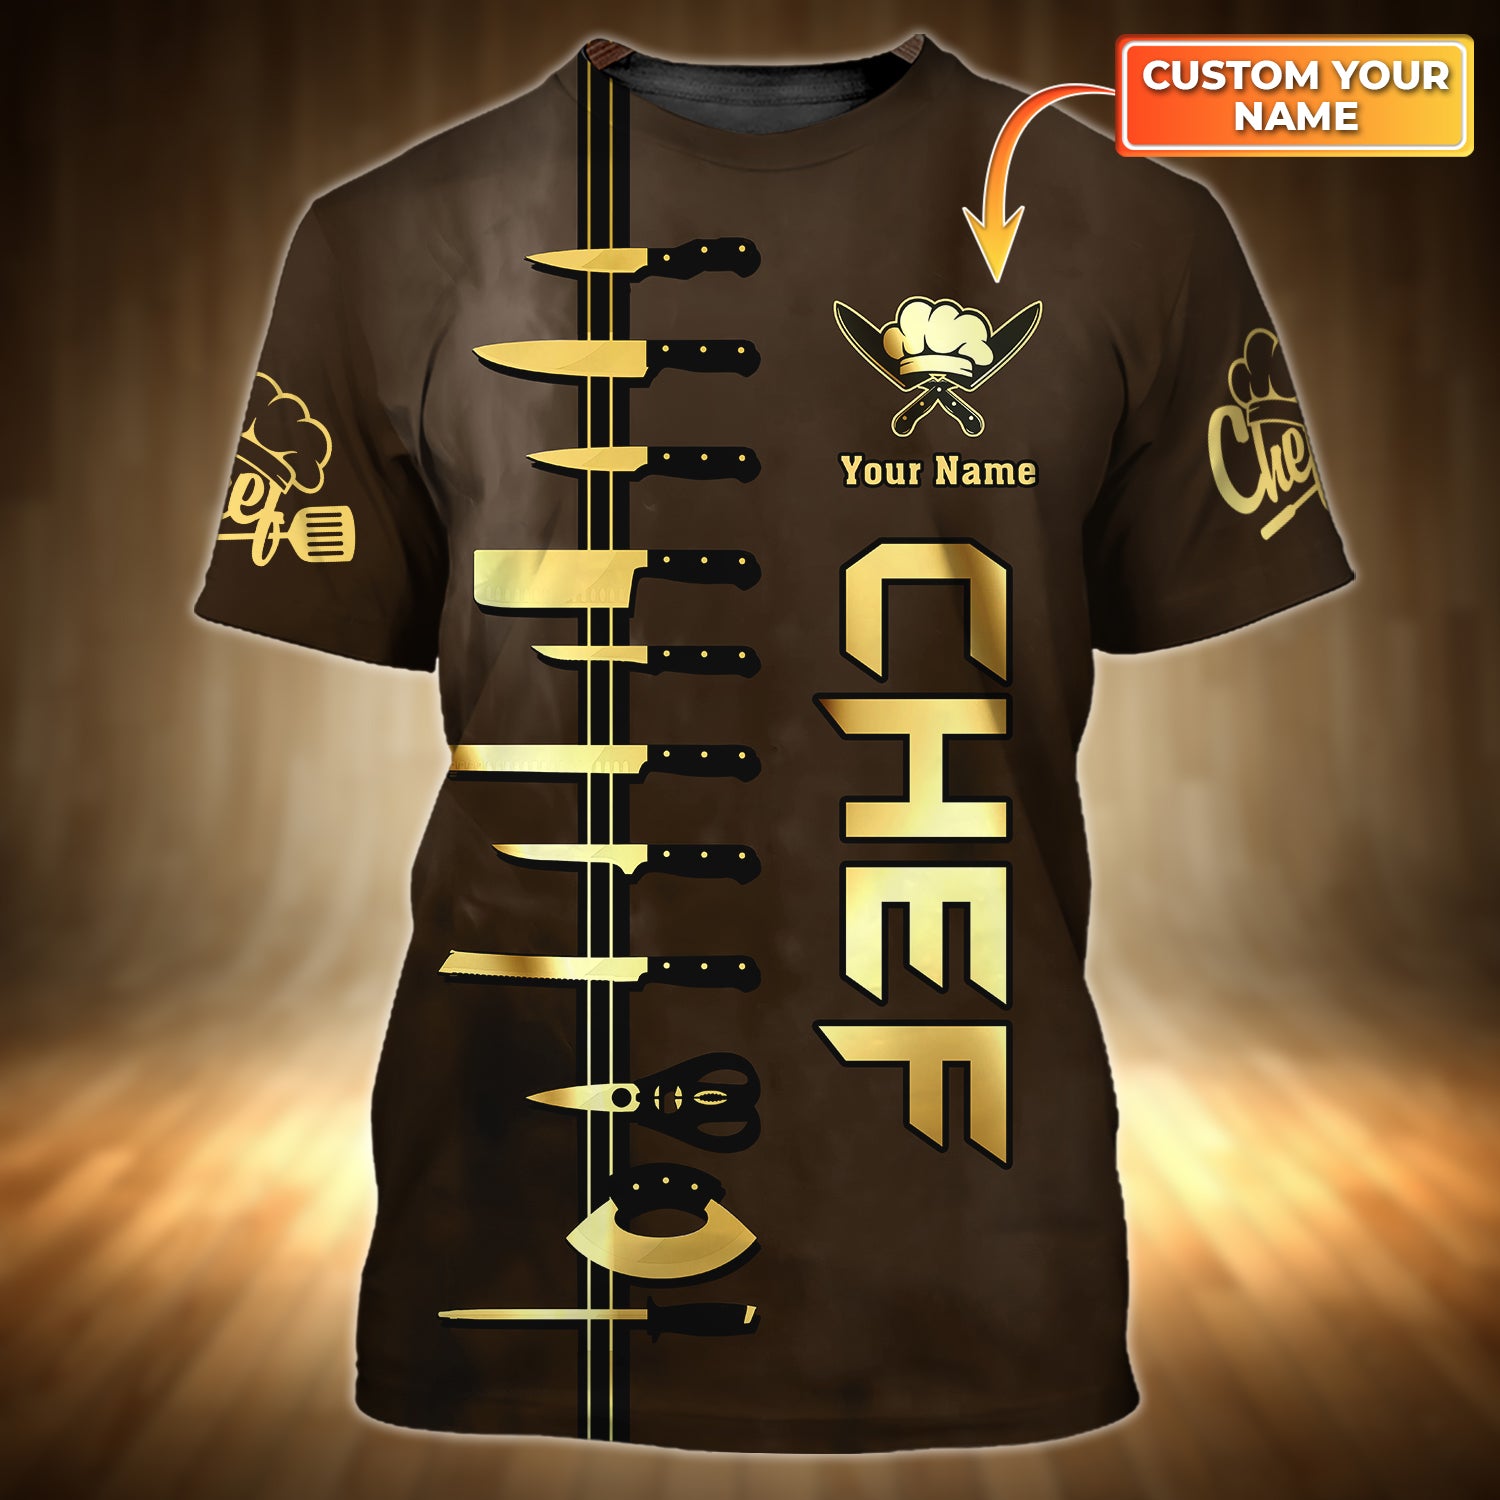 CHEF - Personalized Name 3D Tshirt 27 - RINC98 (Brown & Gold)